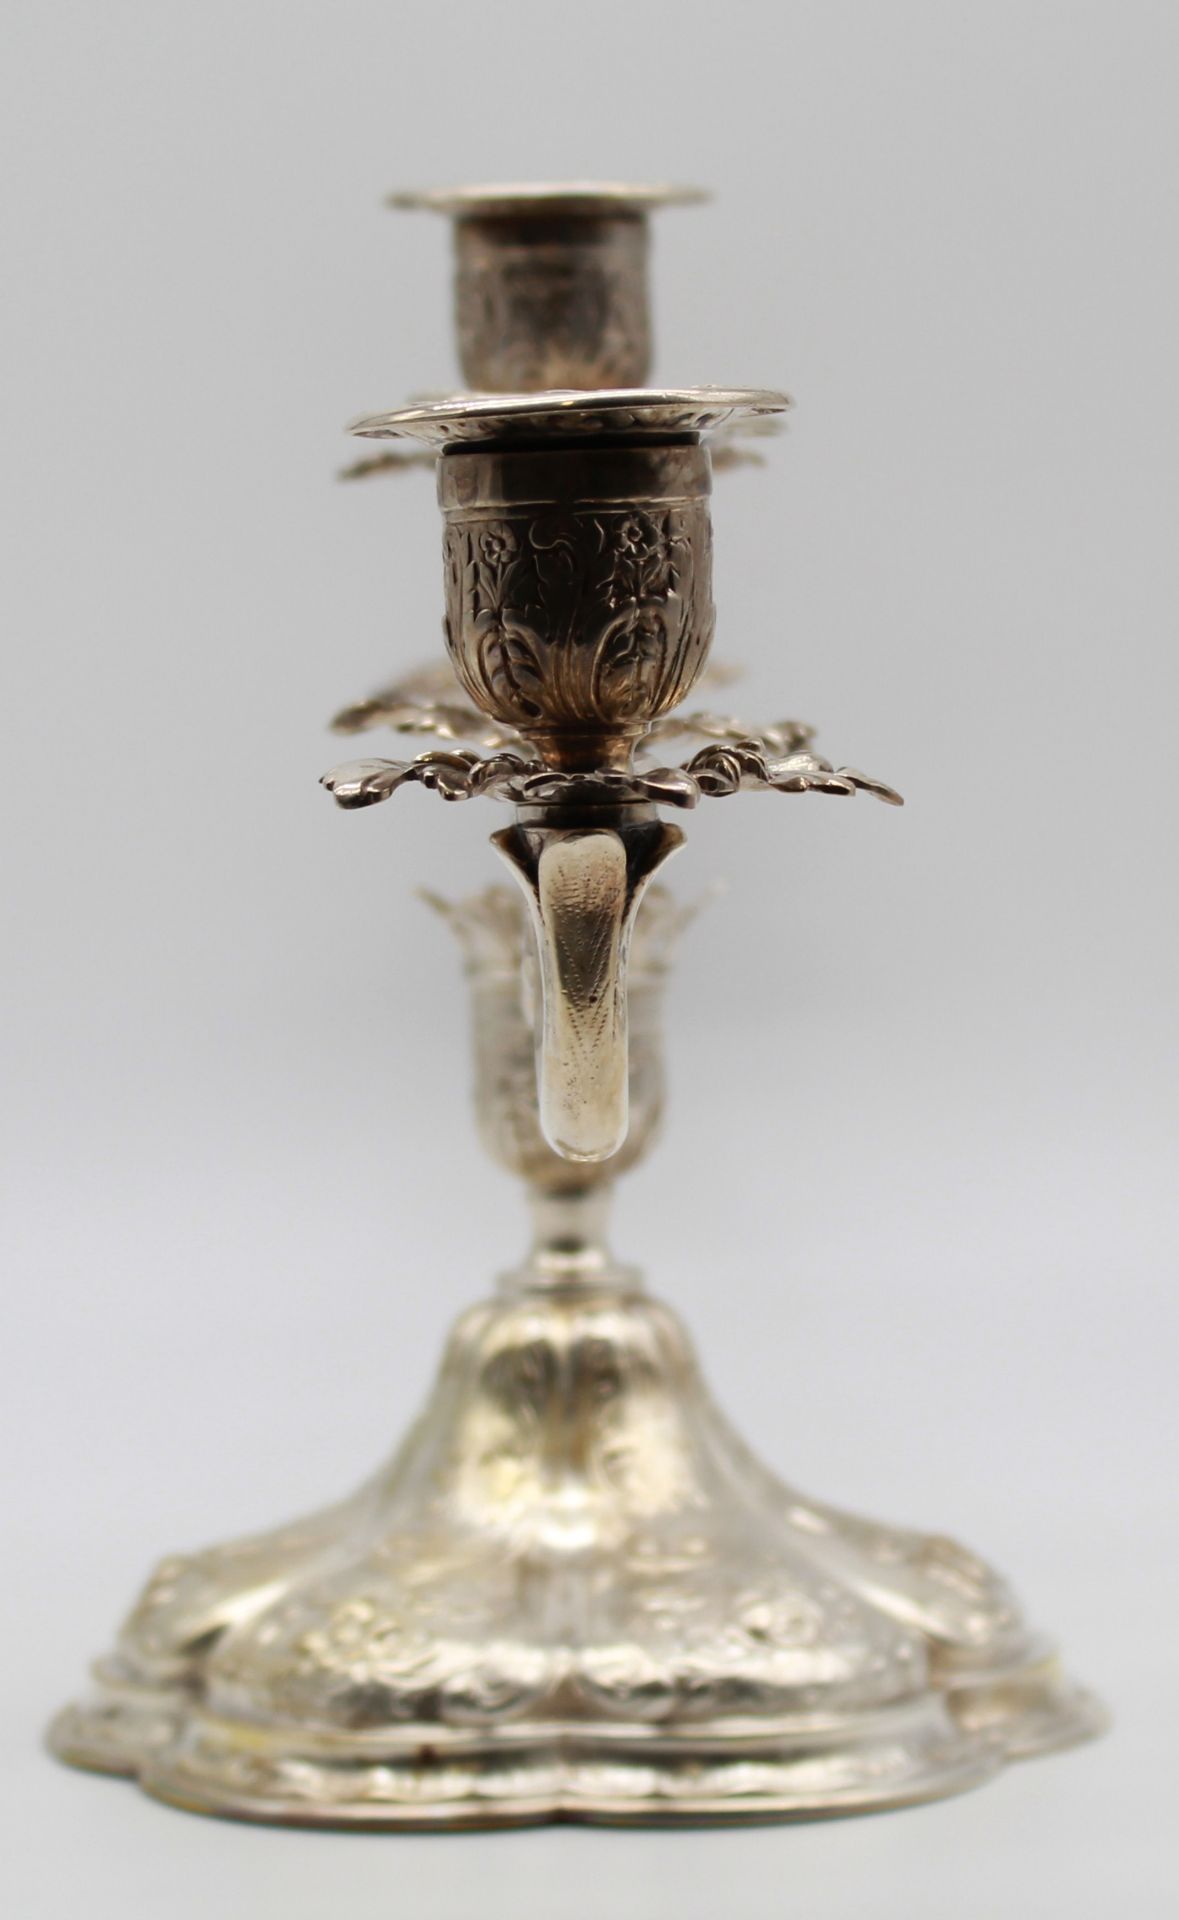 Candlestick, silver 800. 5 flames. Hallmarks. - Image 10 of 15